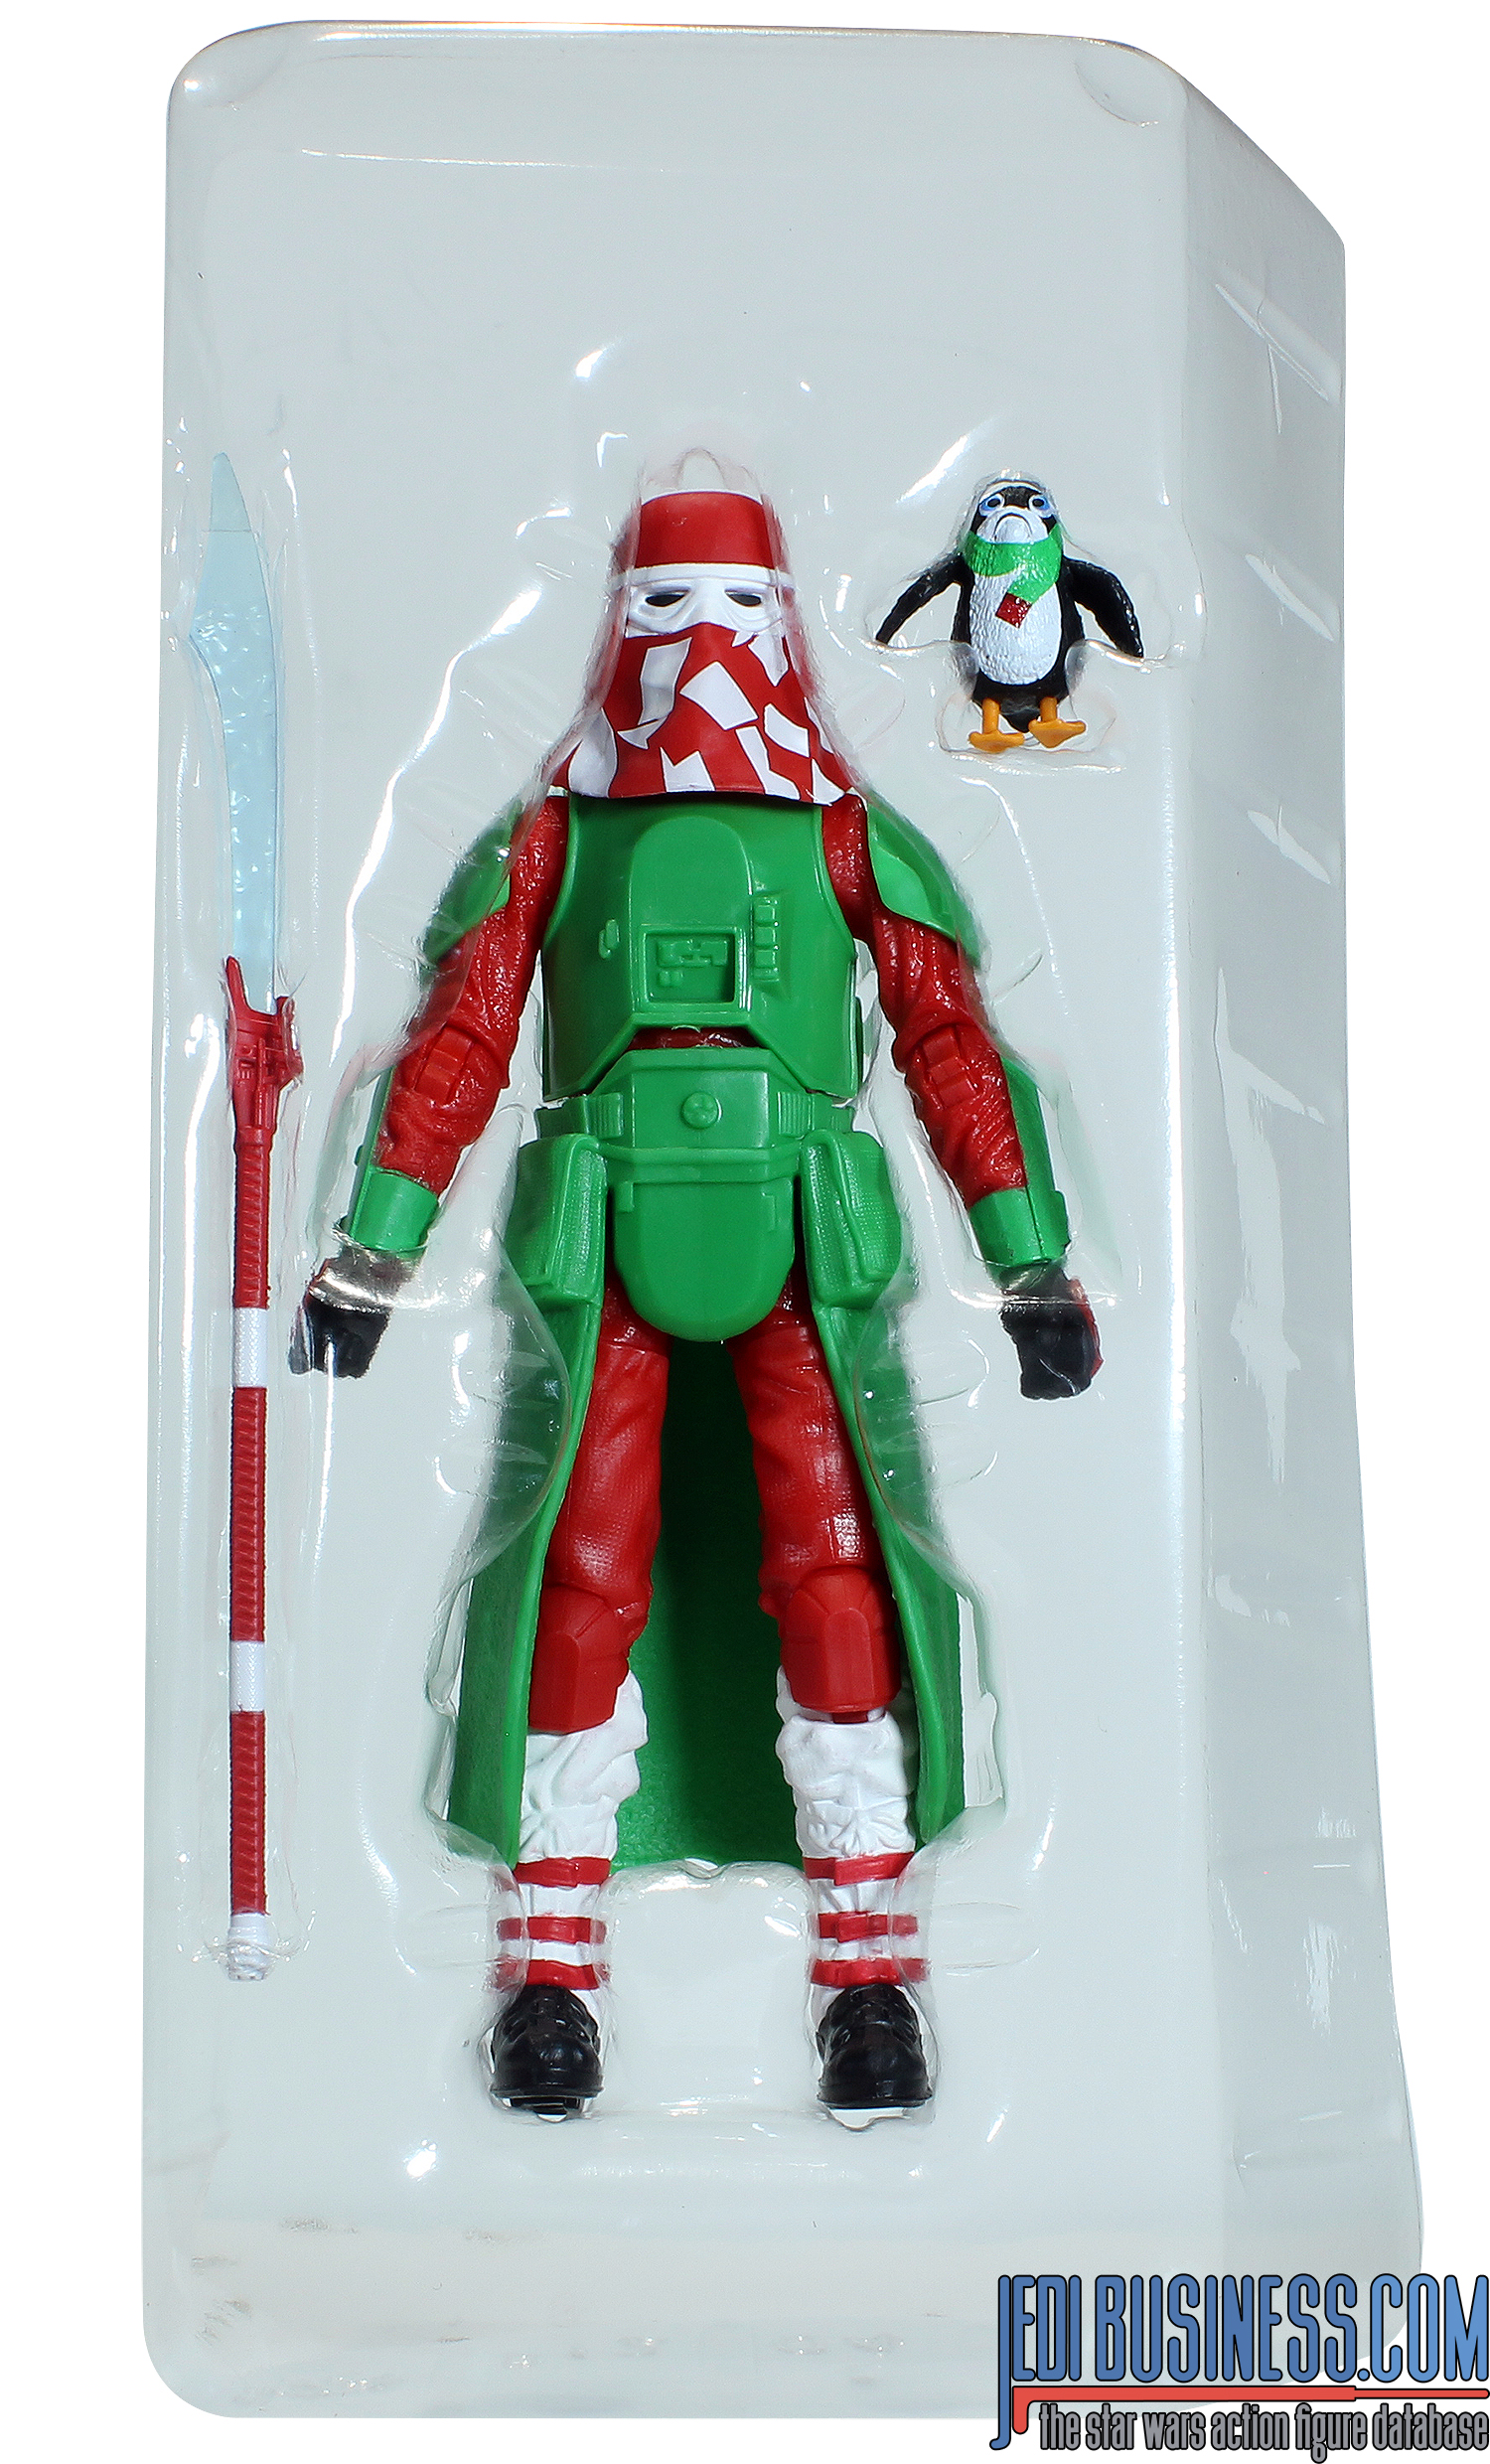 Porg 2020 Holiday Edition 2-Pack #3 of 5